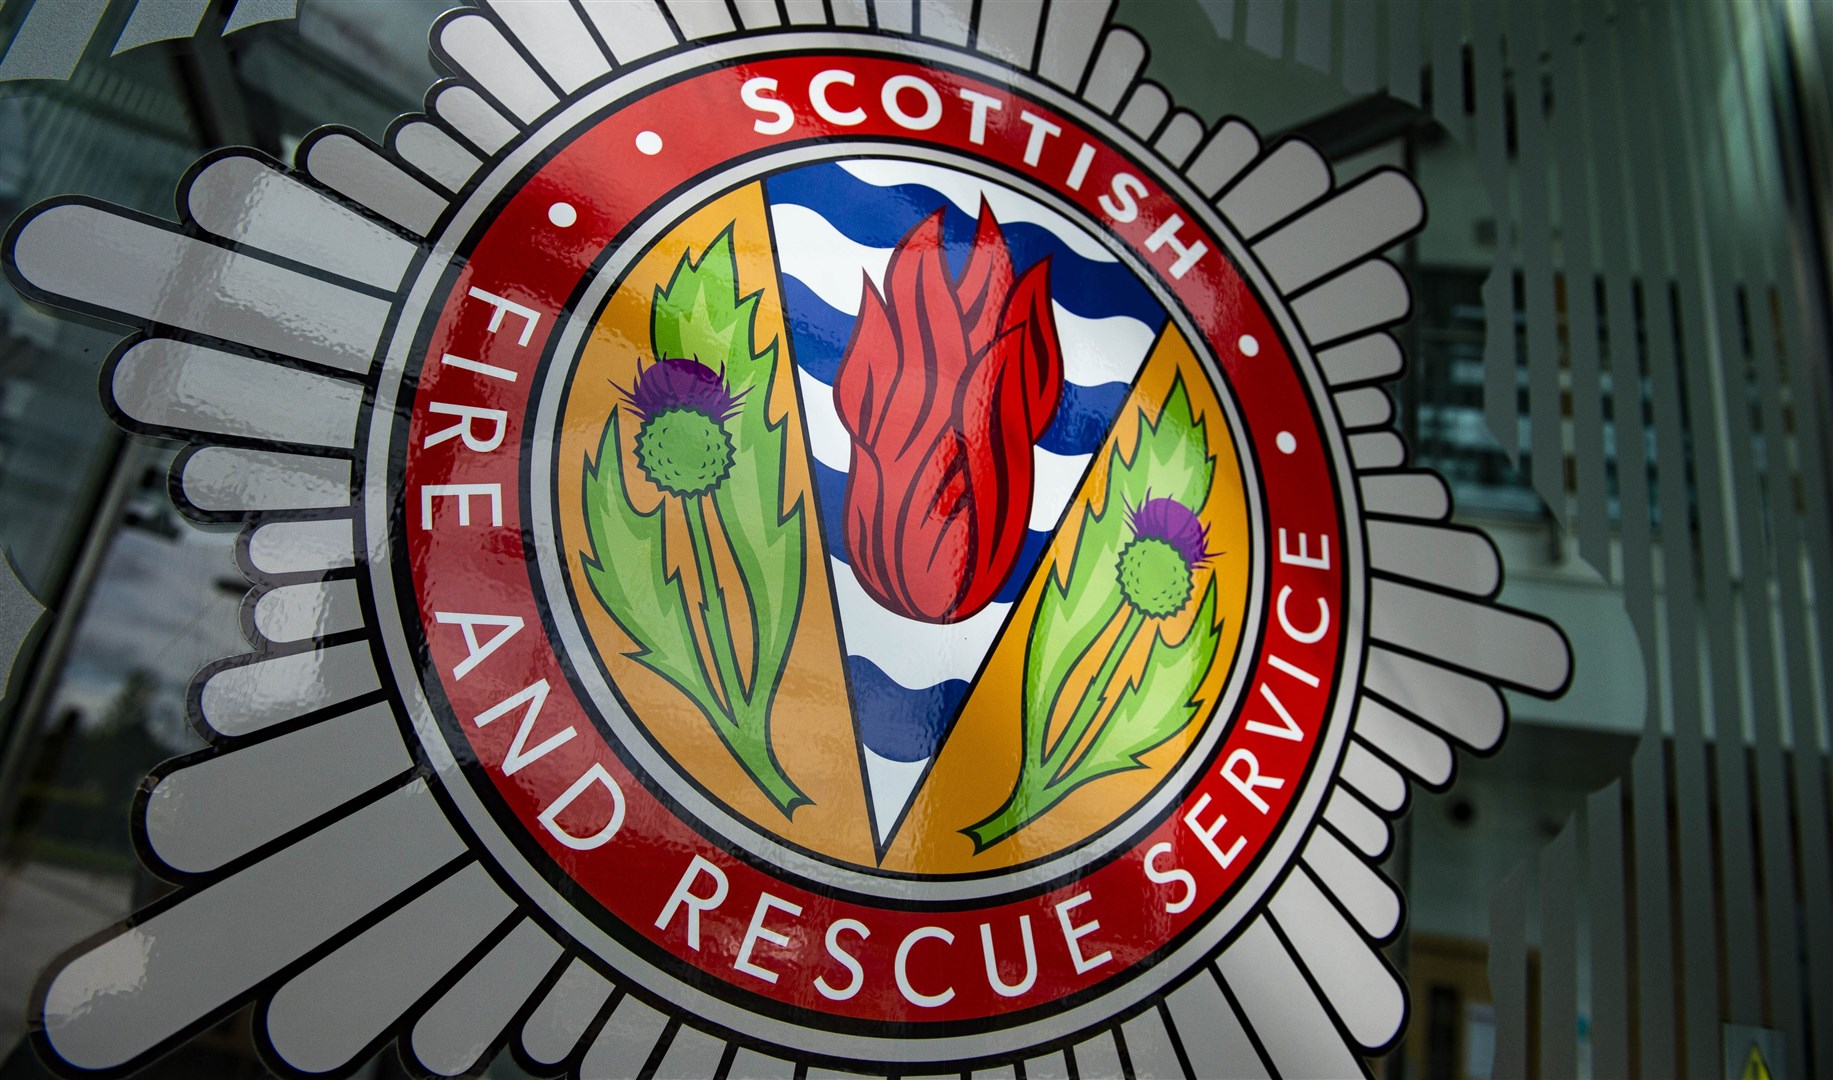 On-call firefighters are wanted in Fortrose and Invergordon.